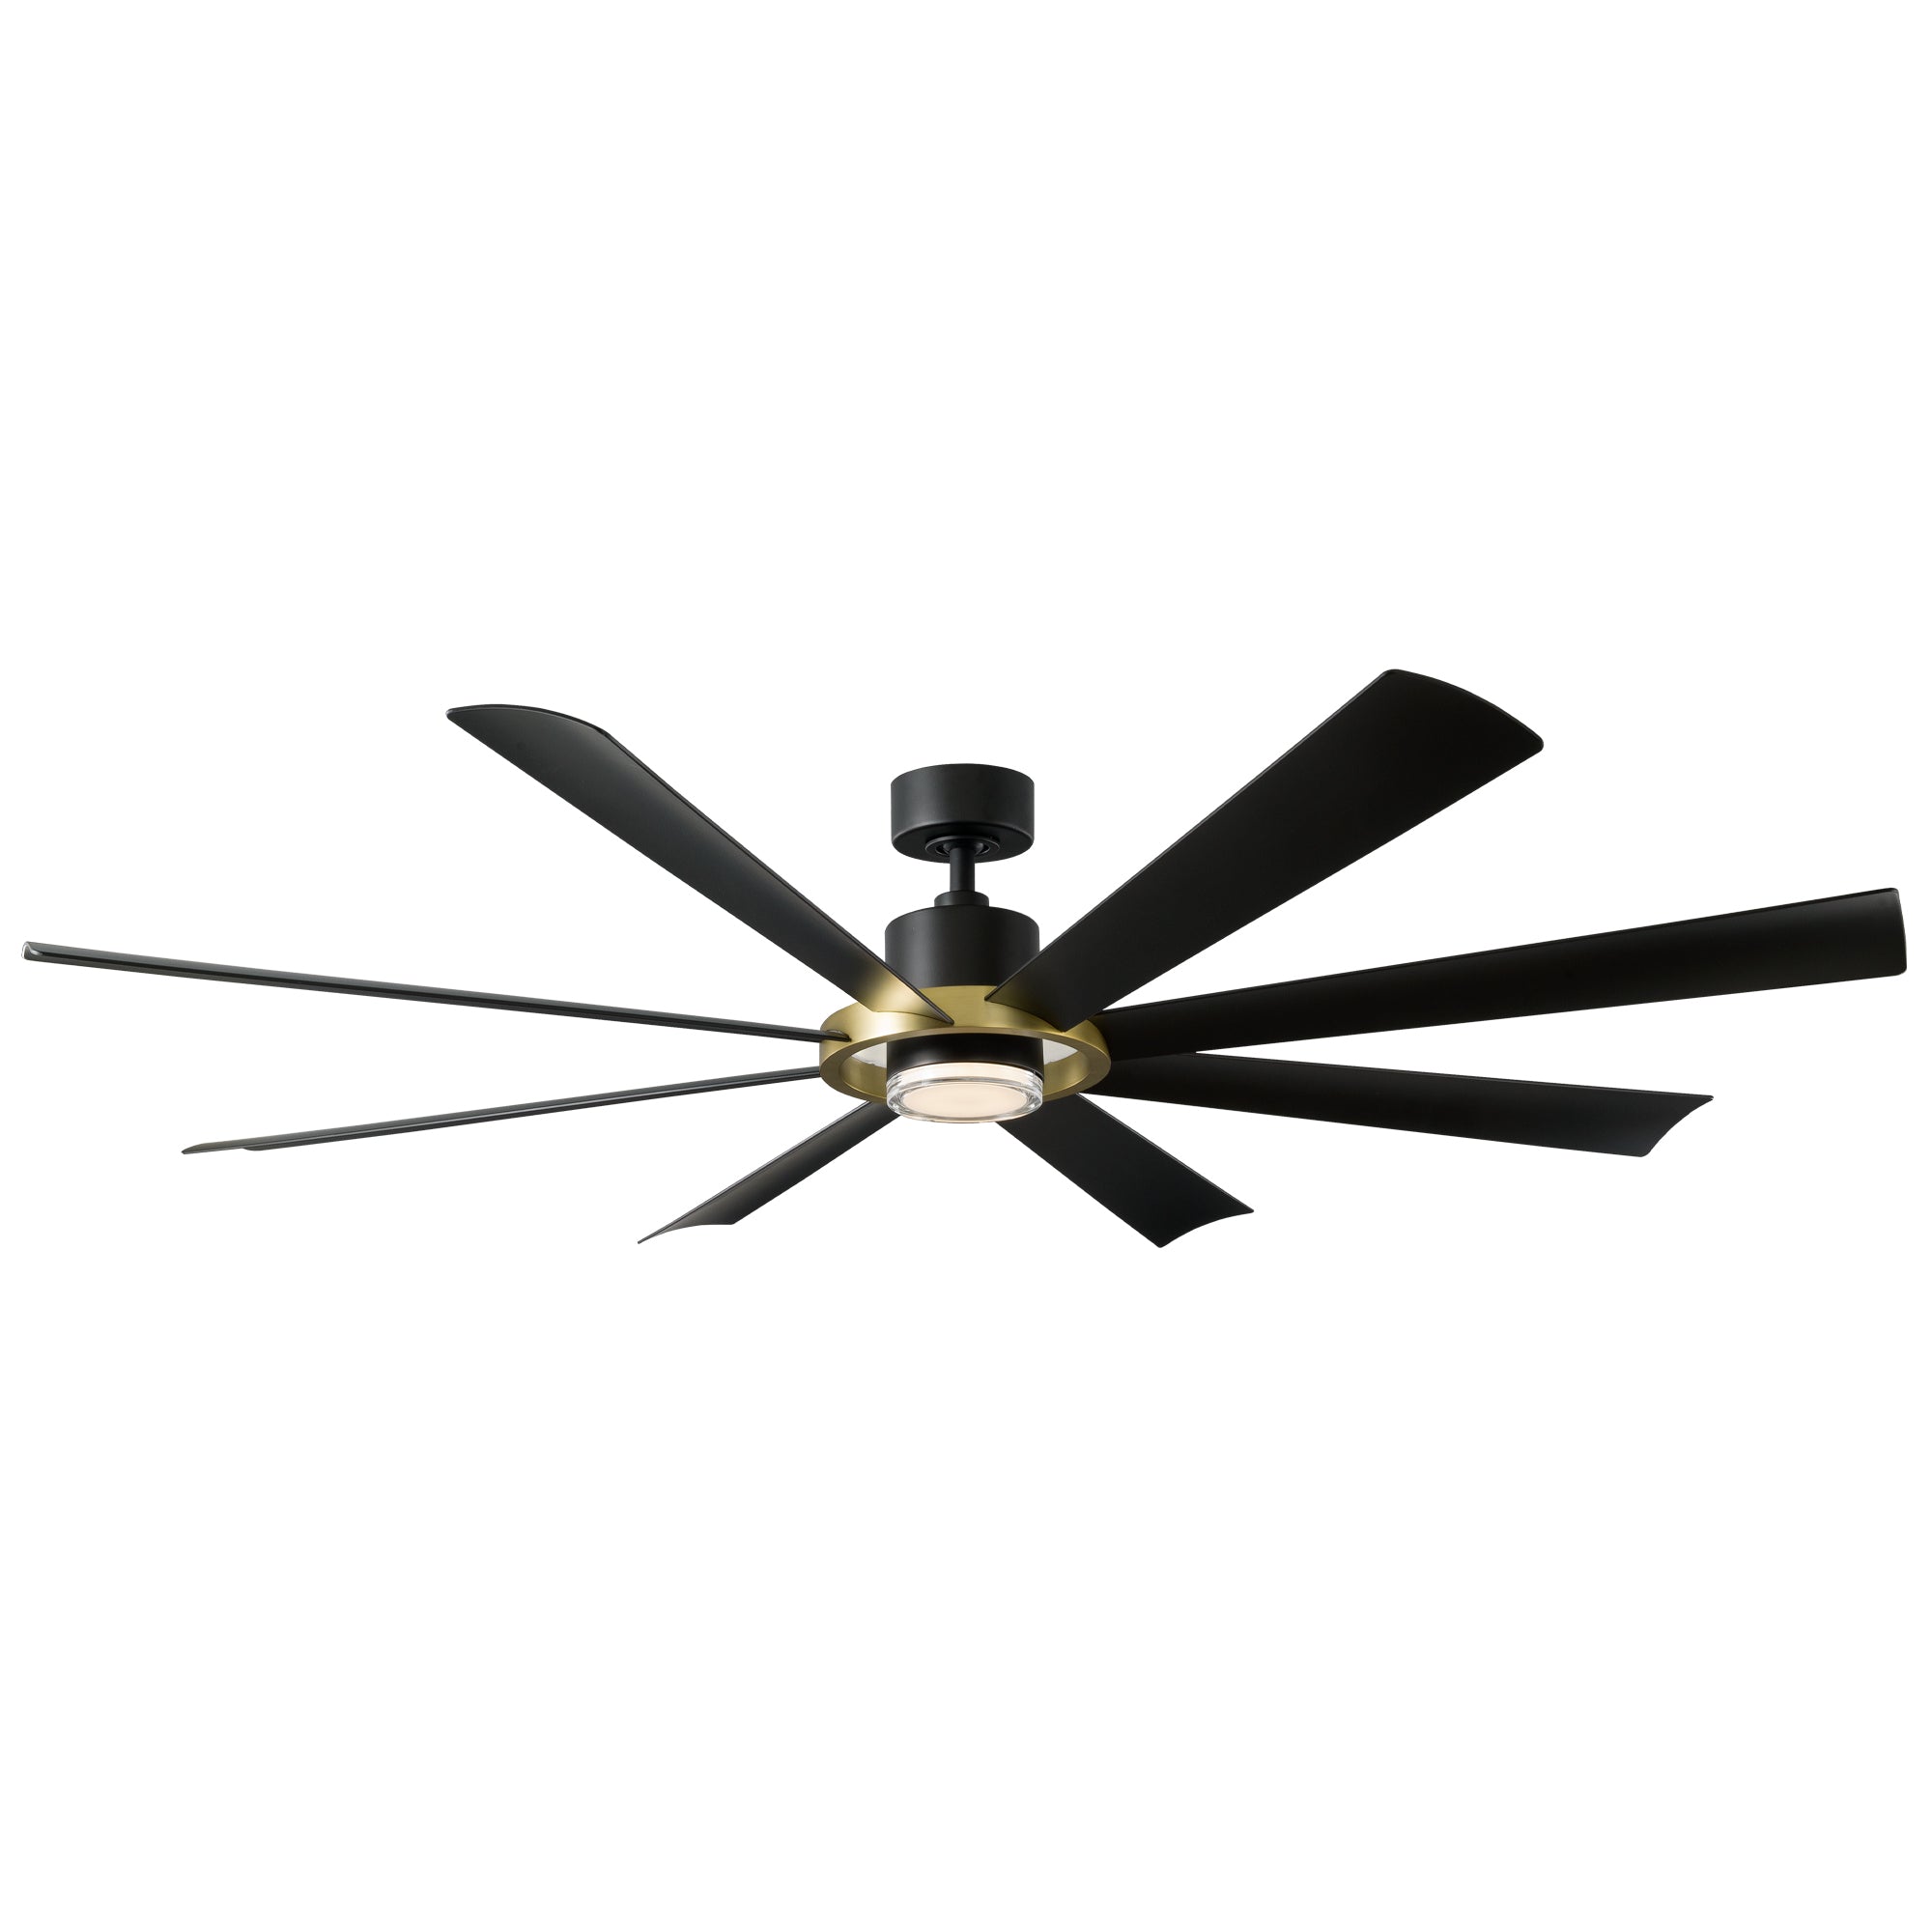 Aura Indoor/Outdoor 8-Blade 72" Smart Ceiling Fan with LED Light Kit and Remote Control